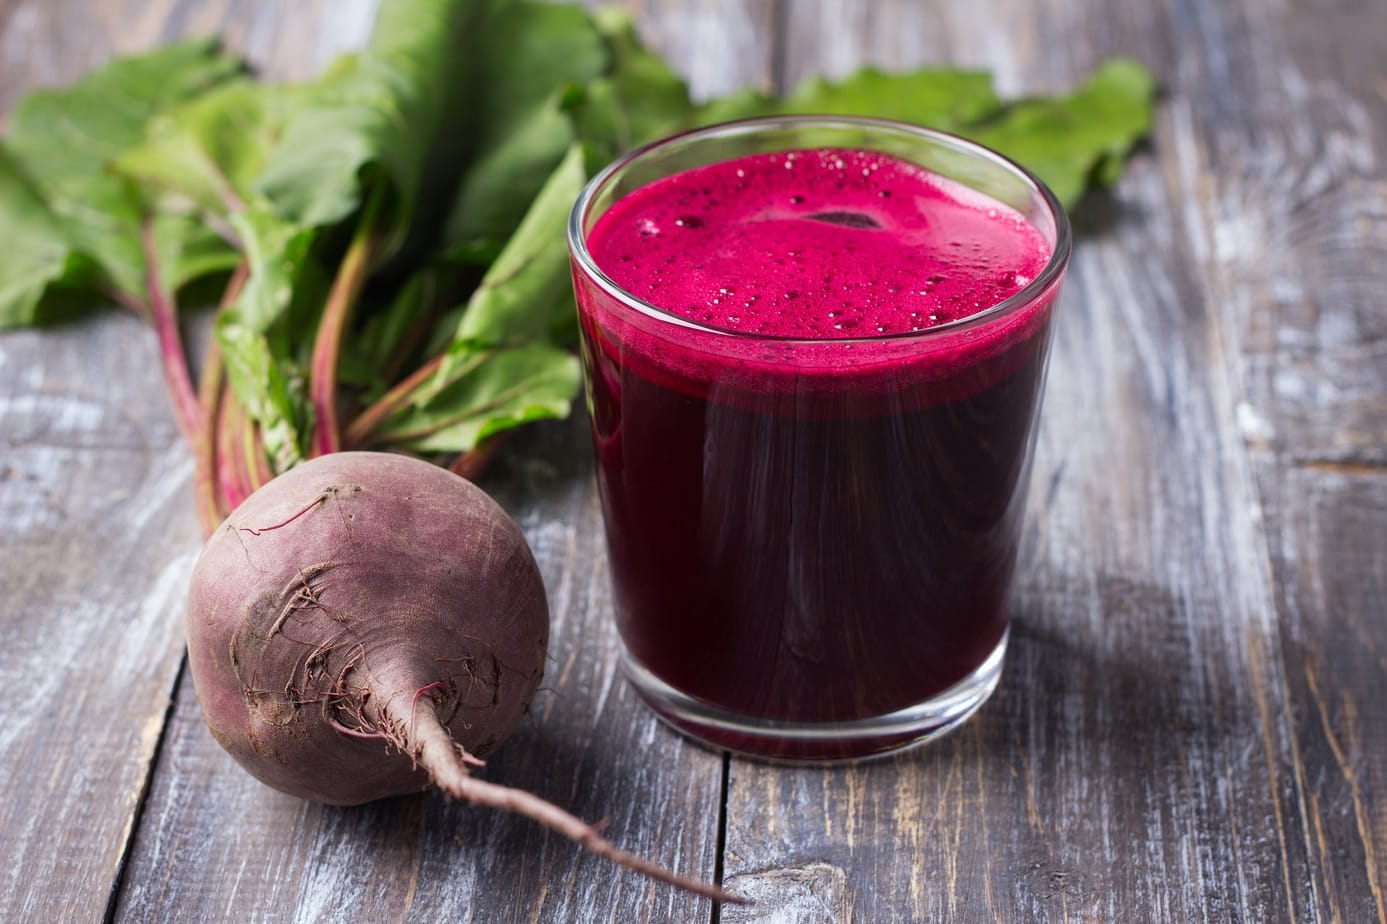 Pickled beet juice. We suggest why it is worth drinking